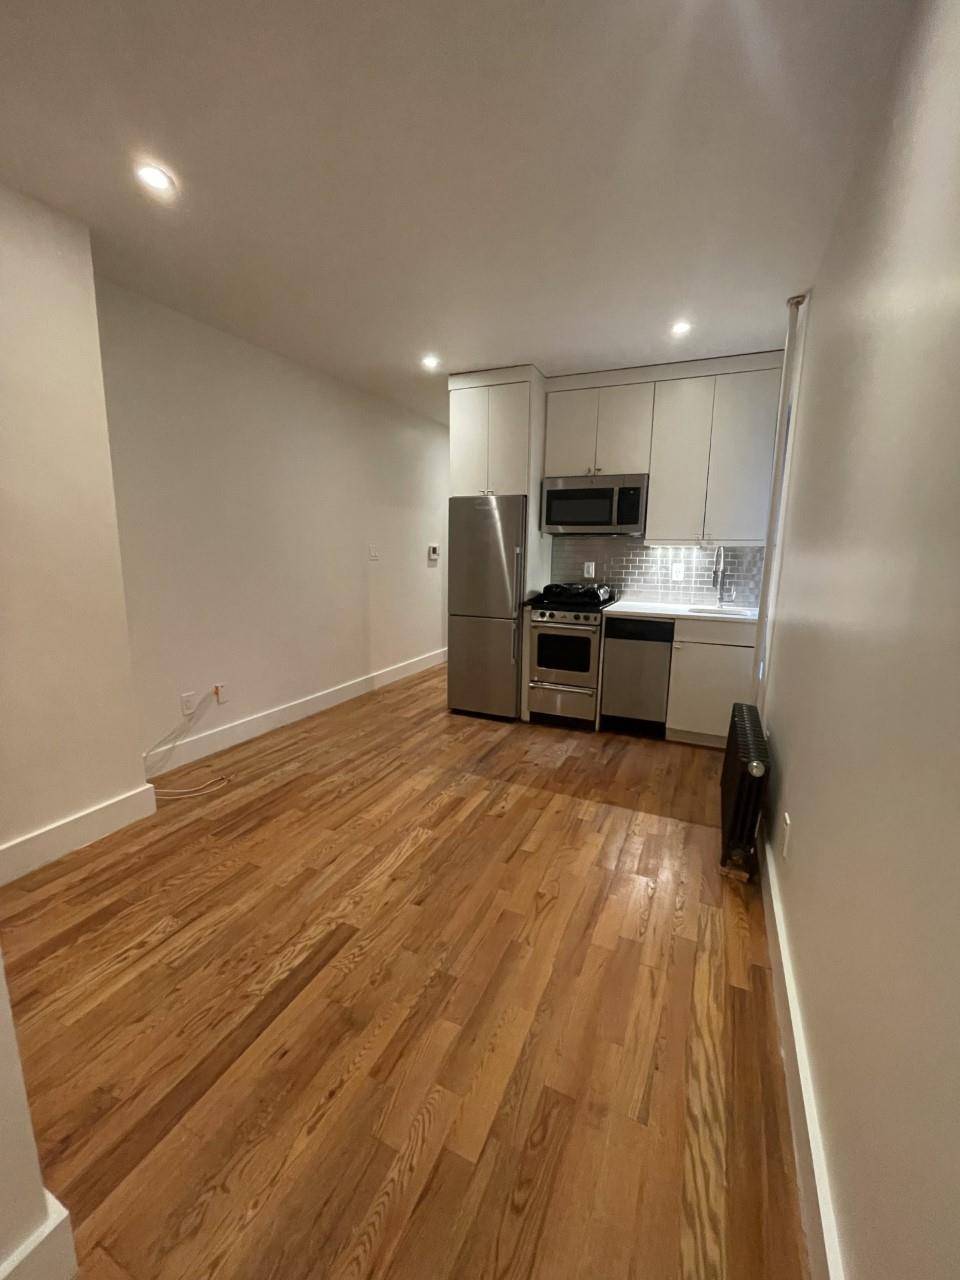 Beautiful 3 bedroom ! 2nd floor walk up Laundry in unit Dishwasher PICTURES ARE NOT OF EXACT UNIT Inquire for video tourPrime South Park Slope apartment featuring exposed brick, bleached ...